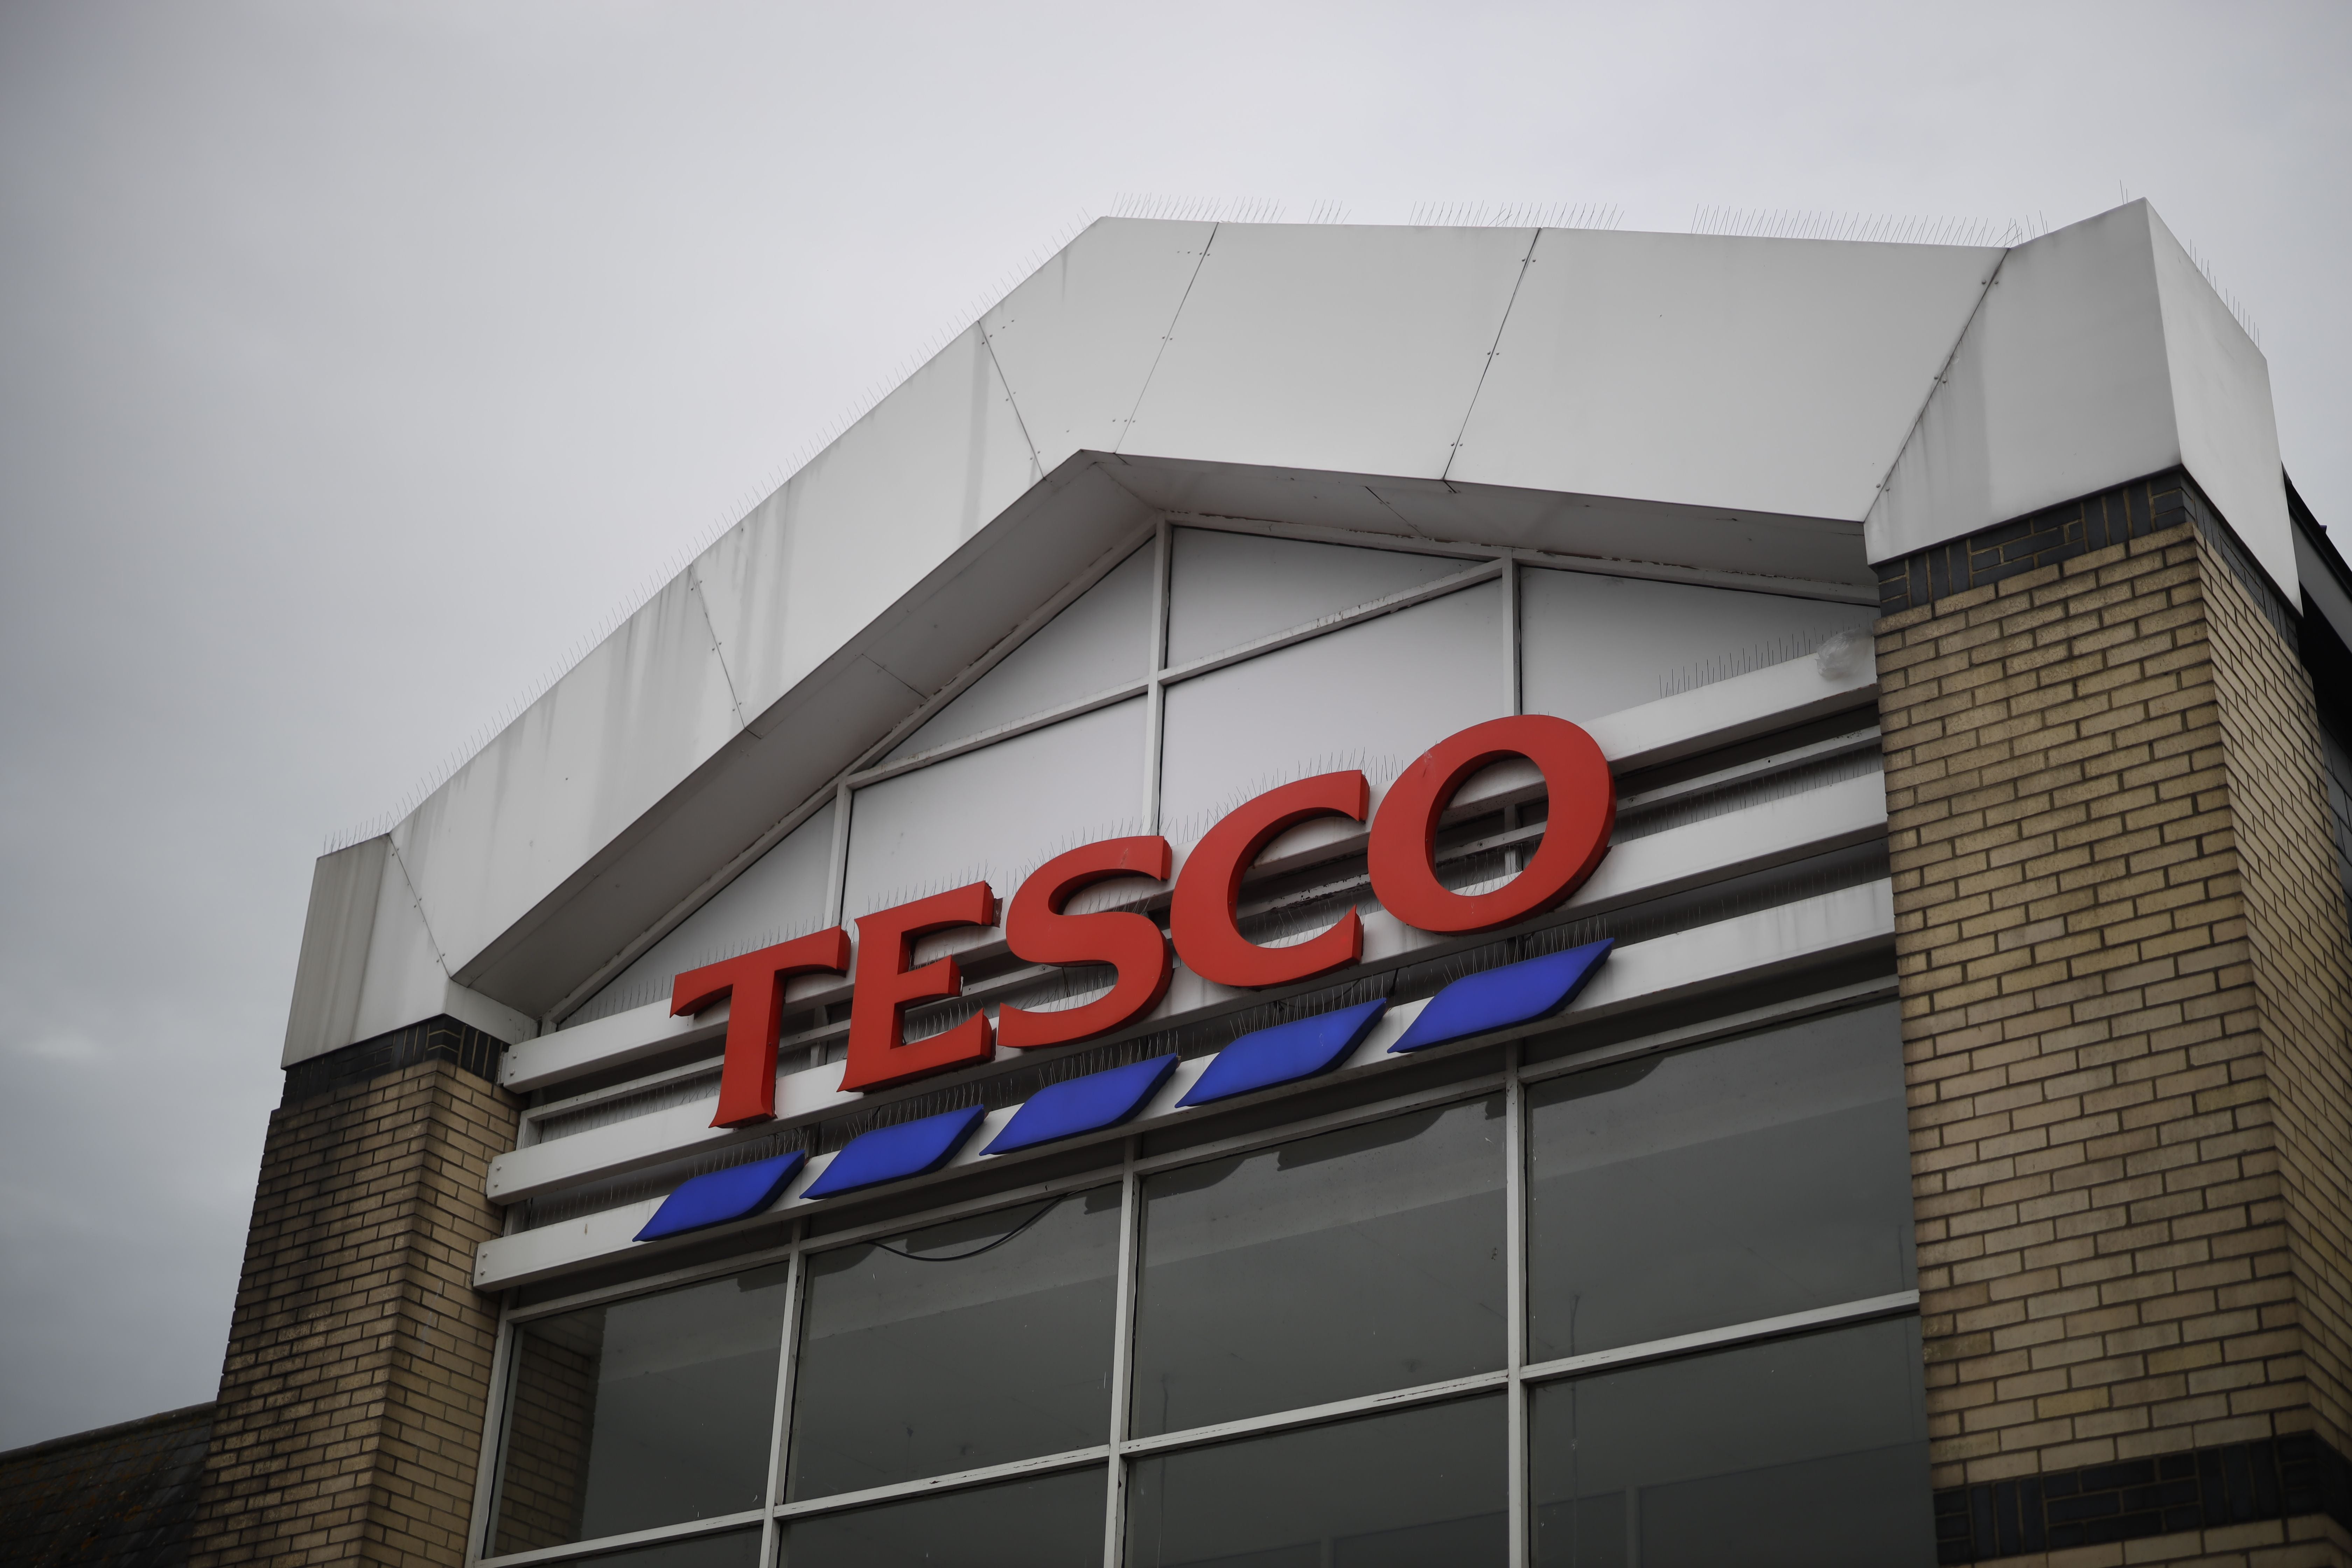 Tesco workers affected by the pay dispute could each be entitled to £10,000 in back pay compensation, Leigh Day law firm says